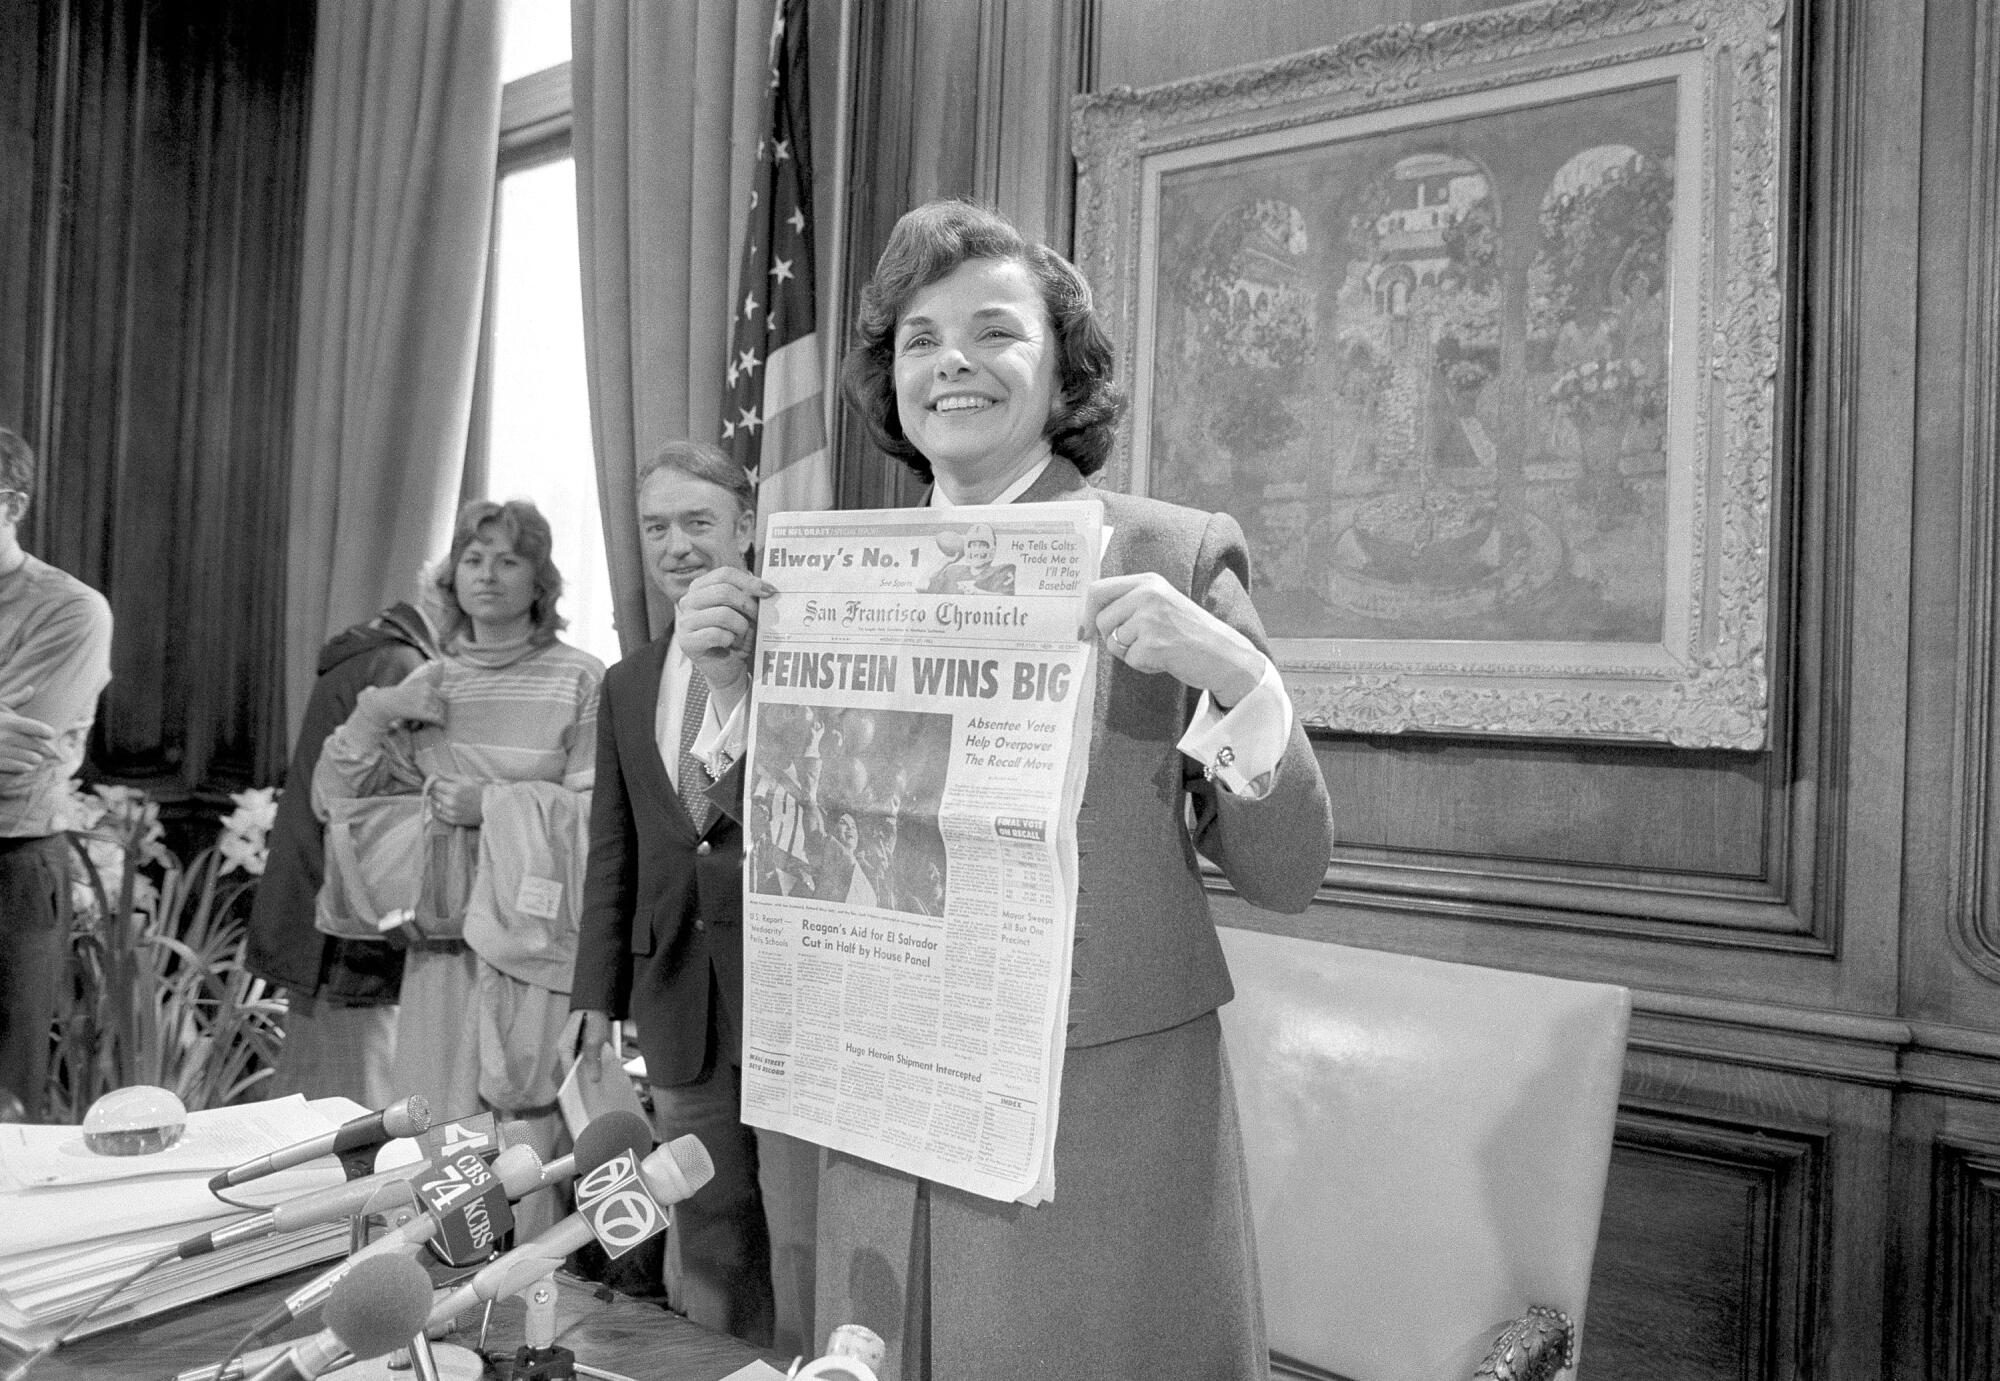 San Francisco Mayor Dianne Feinstein holds up the headlines in her office in San Francisco